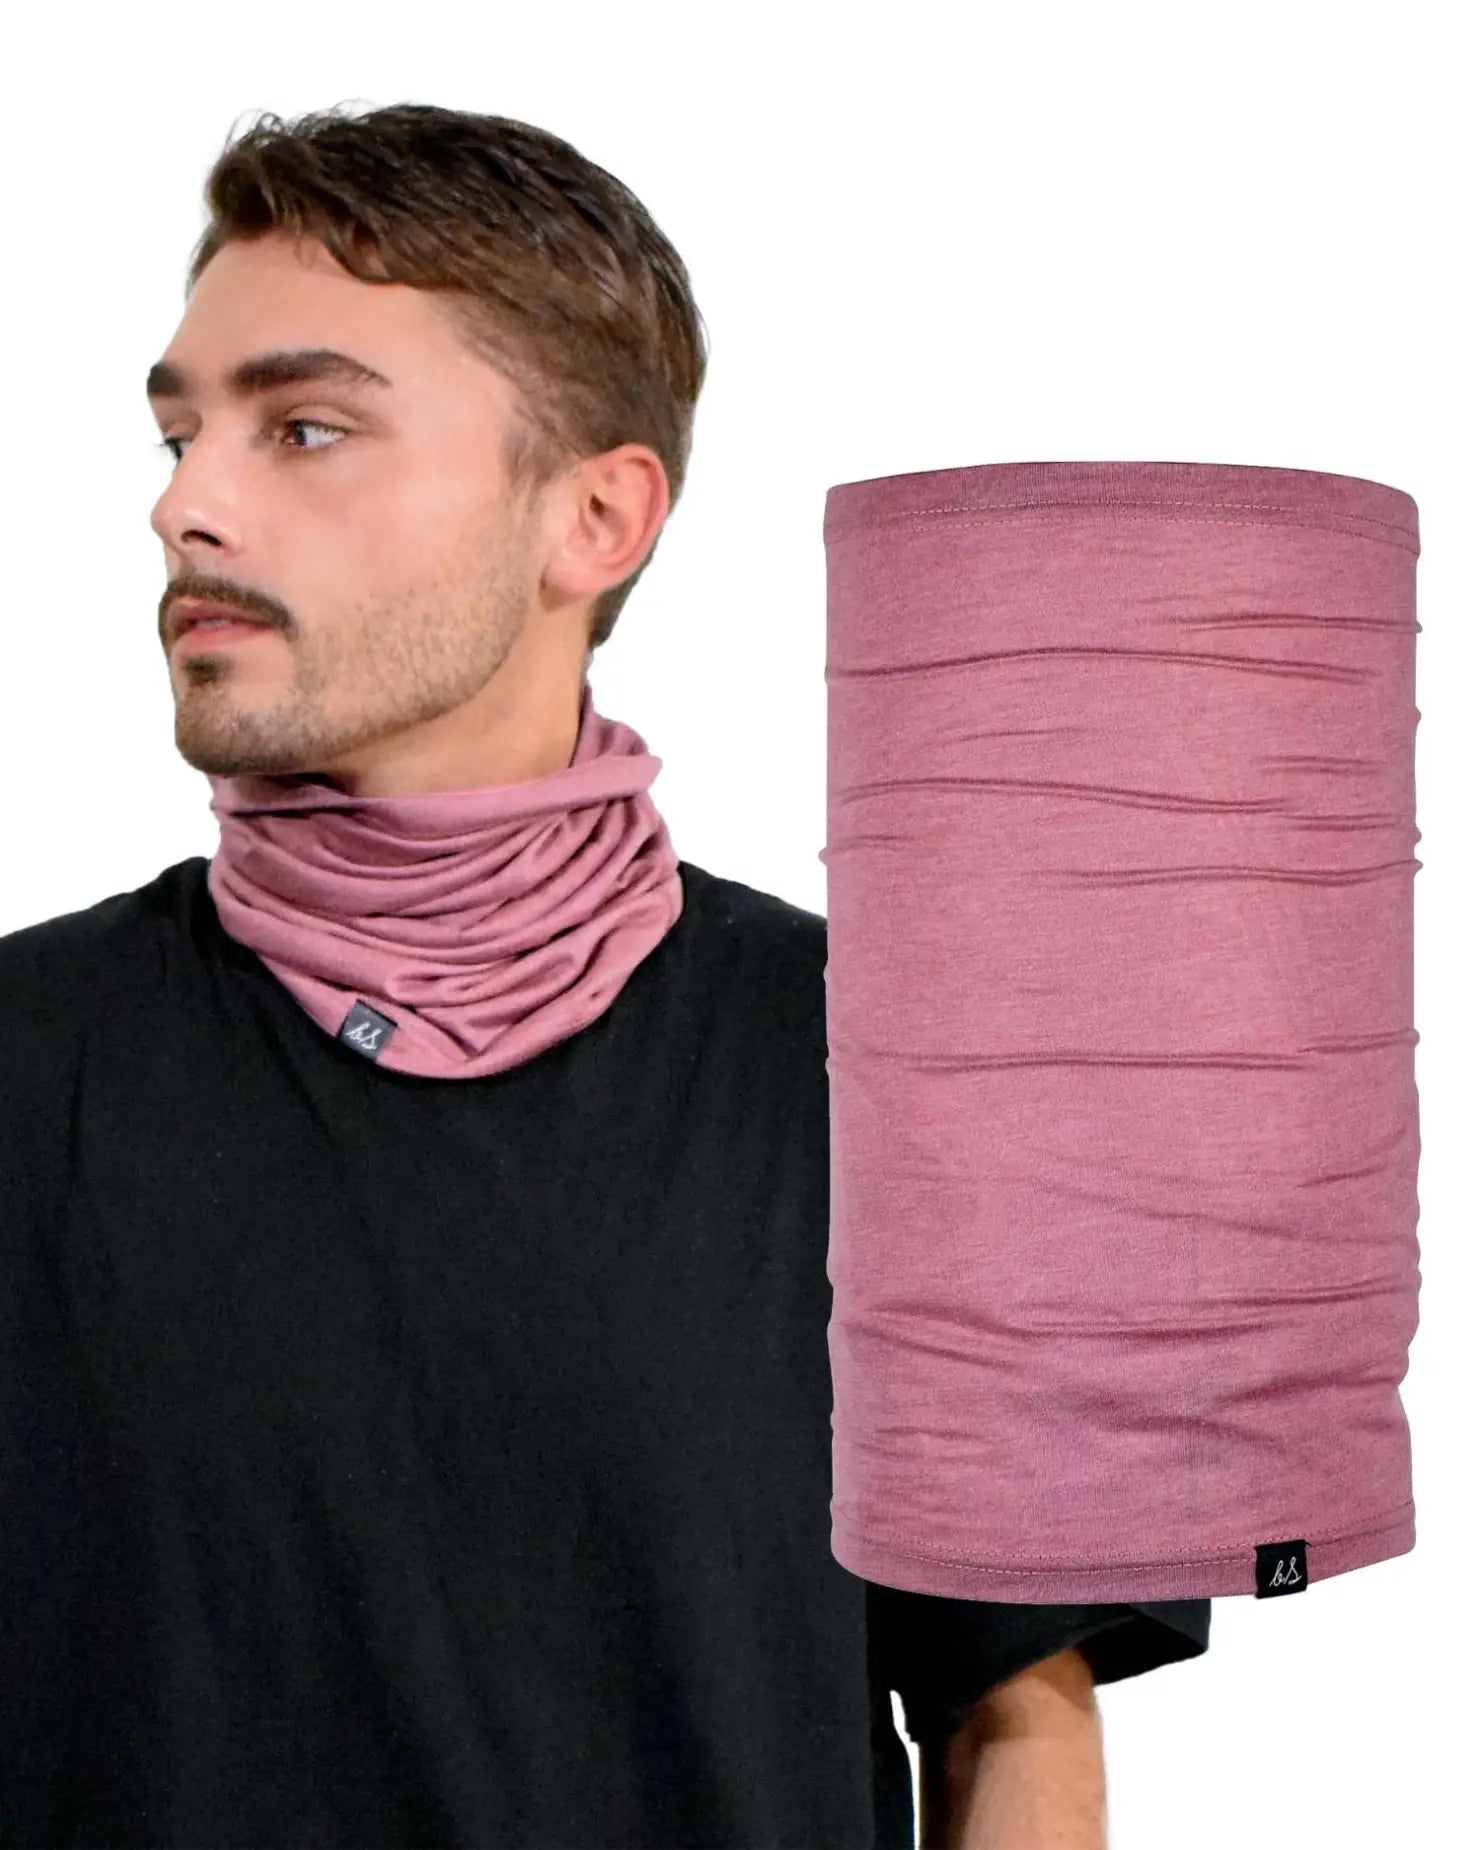 Man wearing pink scarf and black shirt with Cotton Sports Snood Neck Gaiter